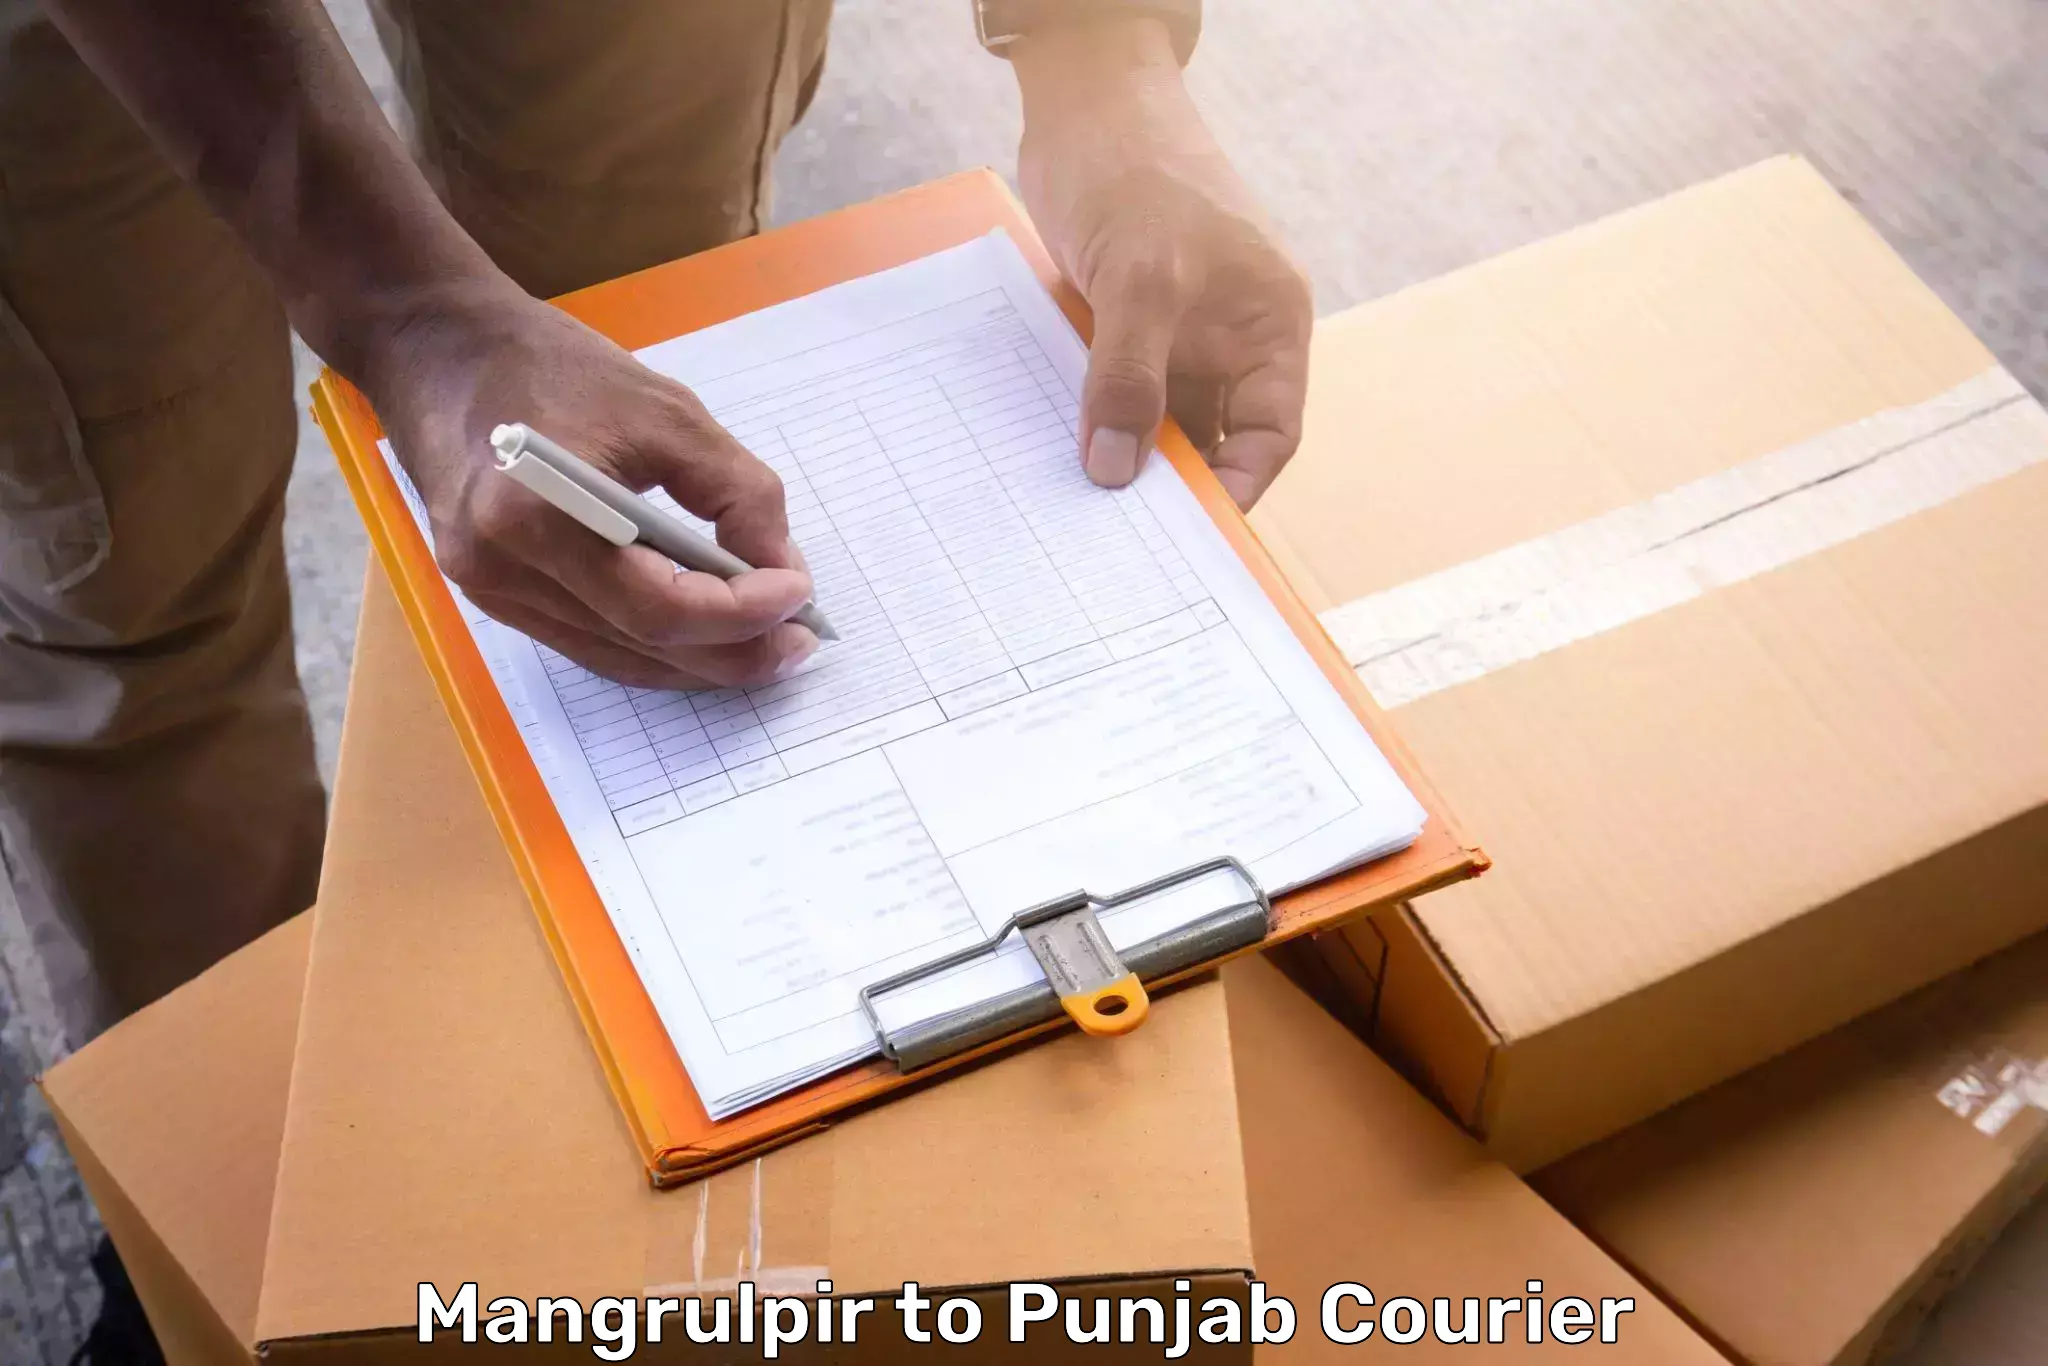 Luggage delivery network Mangrulpir to Sultanpur Lodhi